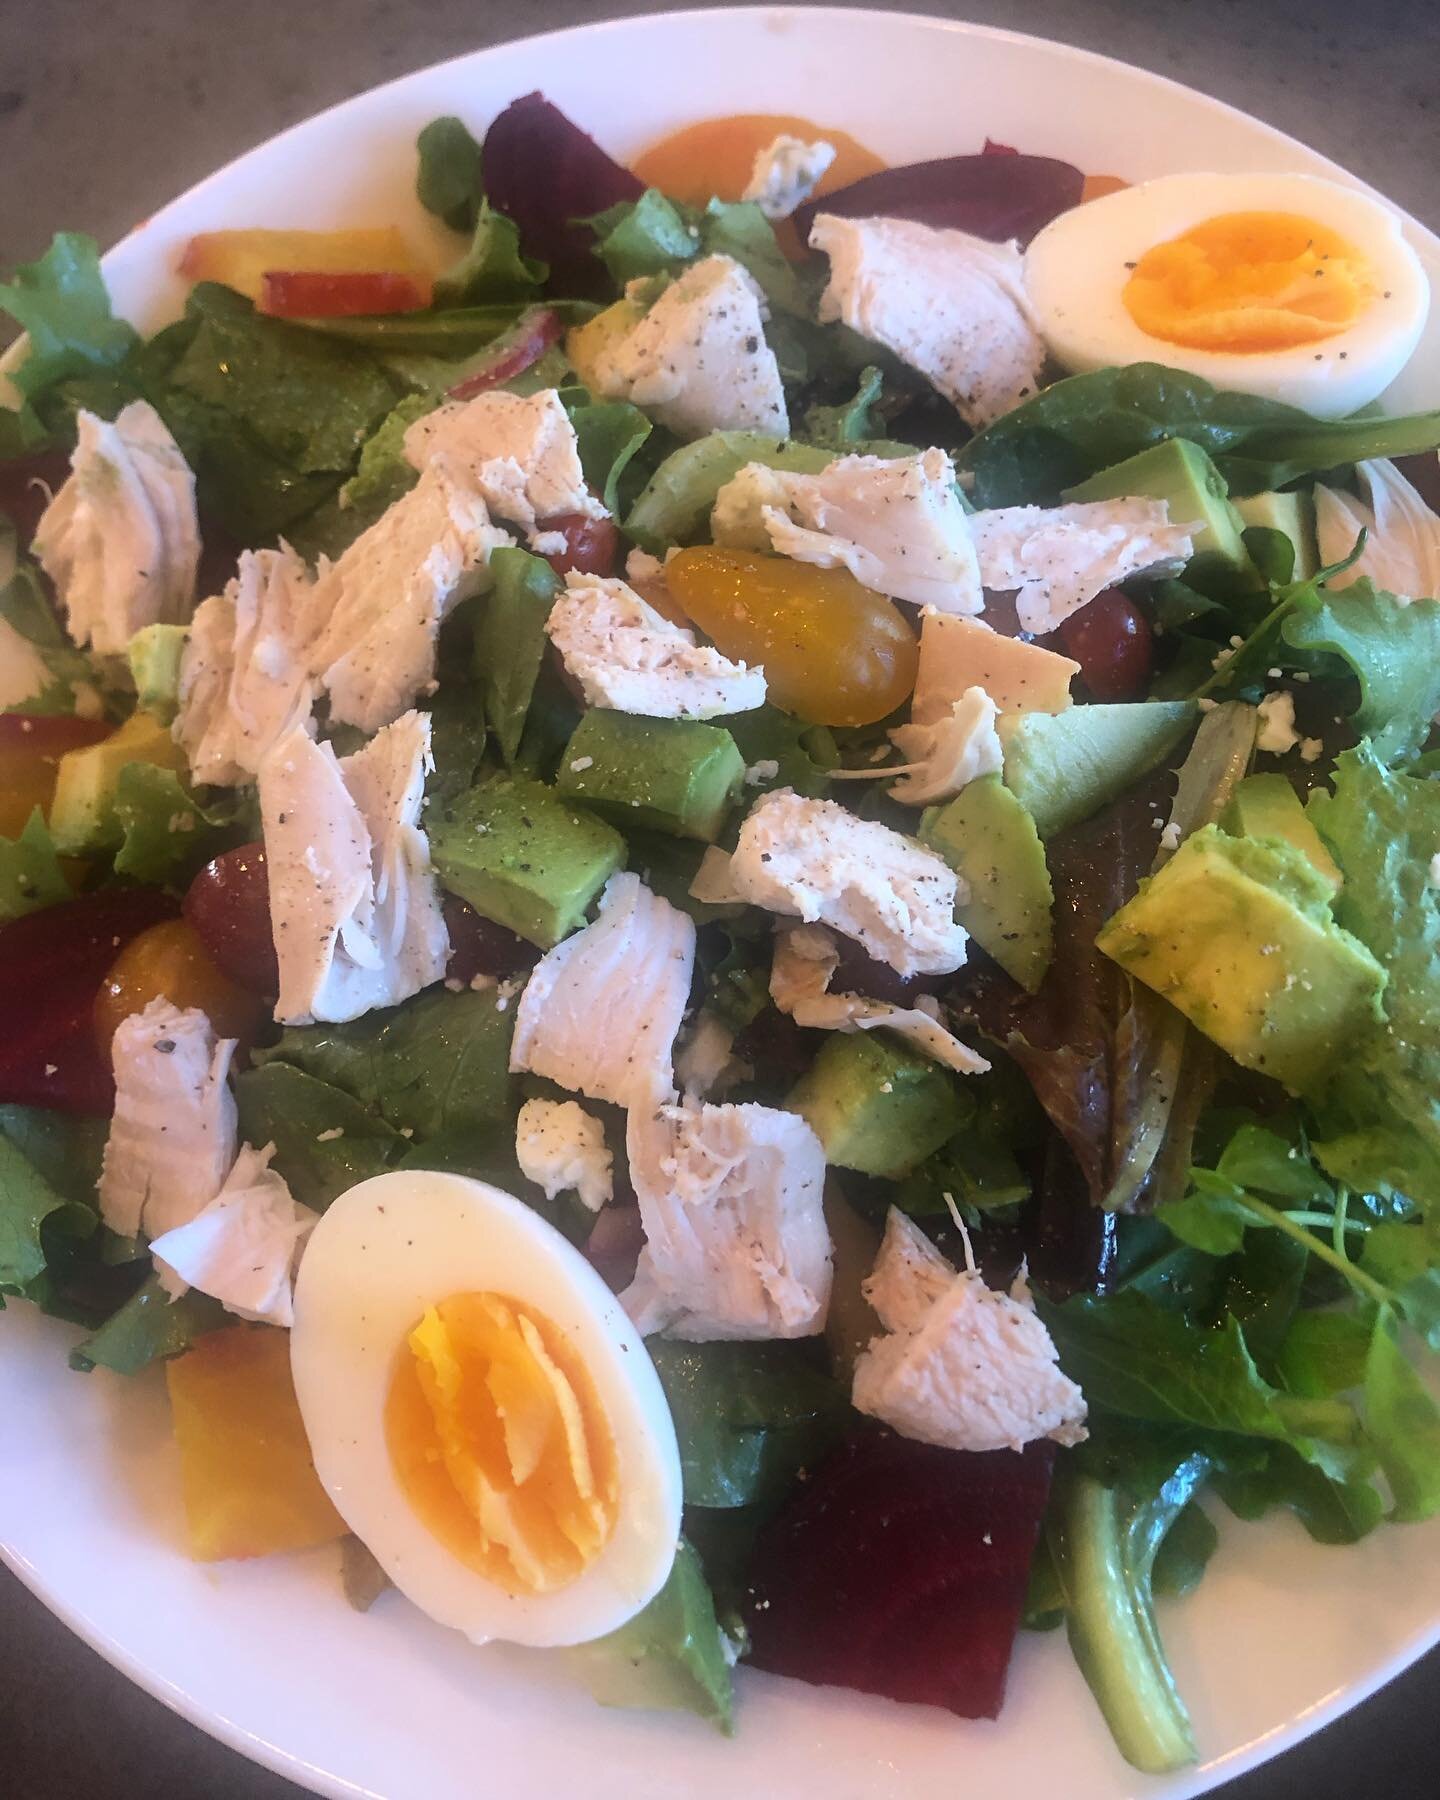 It's been a while since I've posted, and I apologize for that. We got home late this afternoon from Tahoe and no one felt much like eating anything. Dylan mentioned the salad from West End so that's what we recreated!
Mixed greens and pea shoots, I r